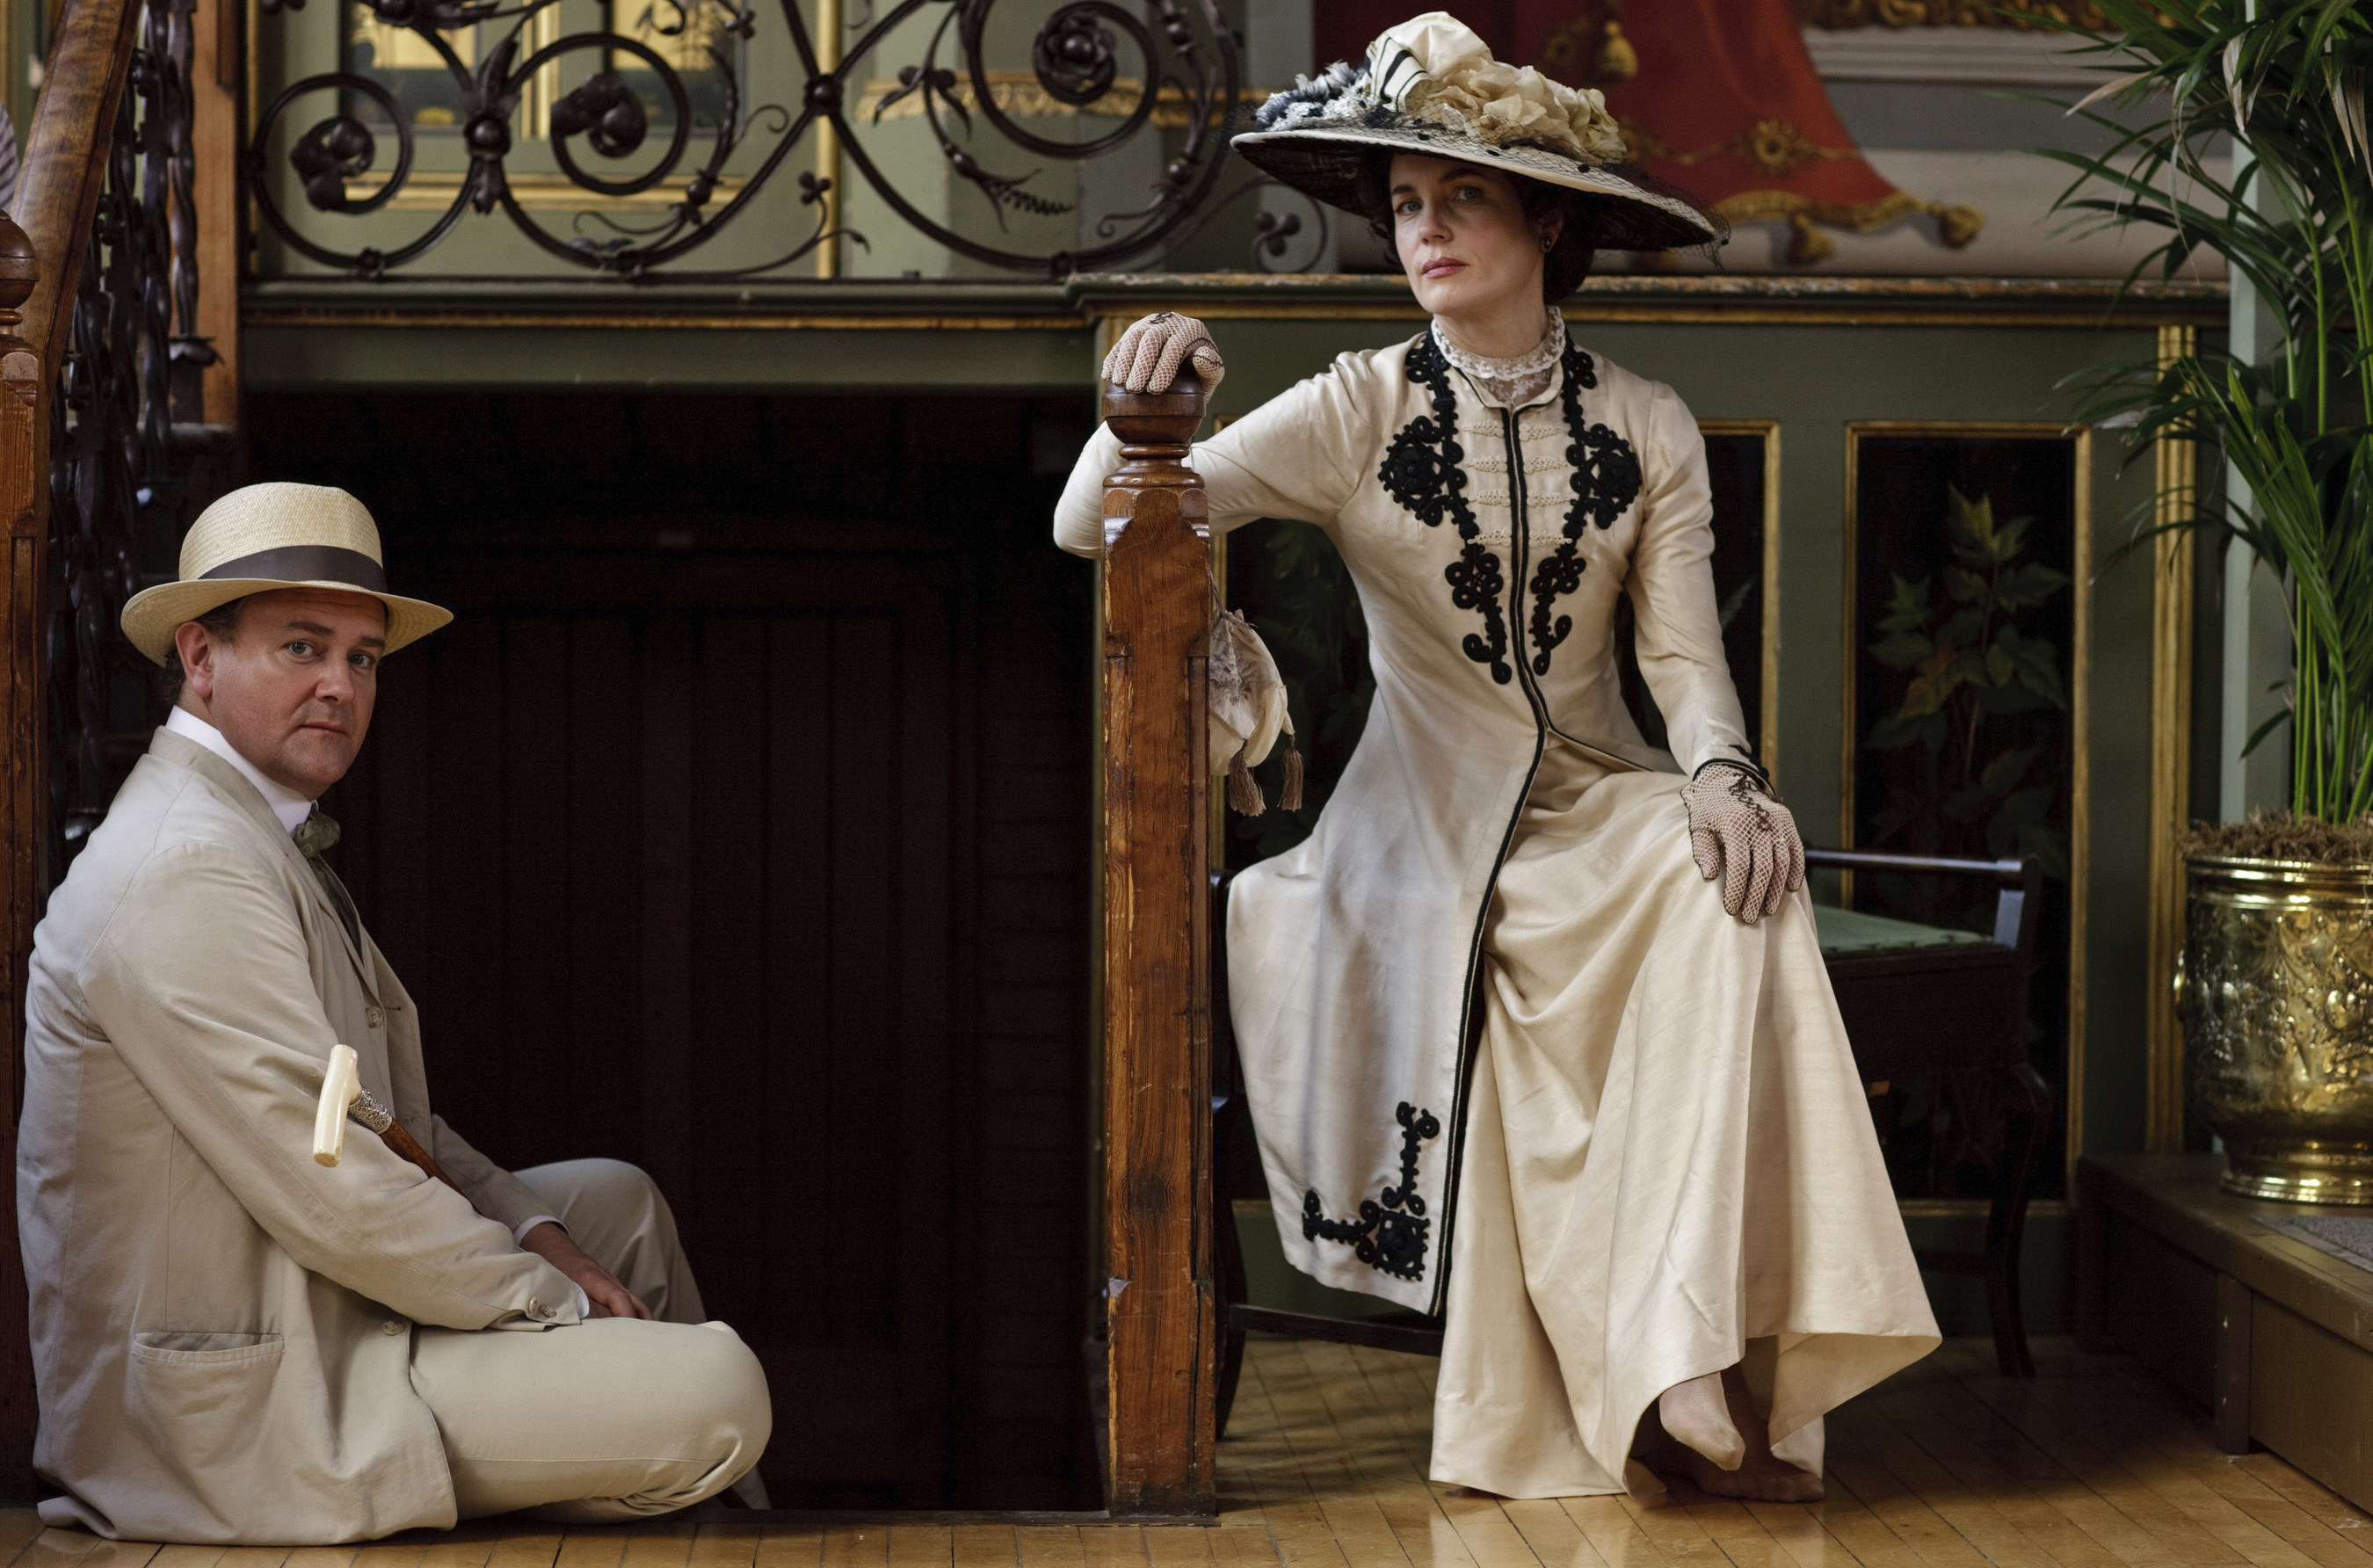 Downton Abbey costumes come to Biltmore in February 2015. Photo is from Downton Abbey (PBS Masterpiece) Season 1, 2010. Shown from left: Hugh Bonneville, Elizabeth McGovern. Credit: Carnival Films